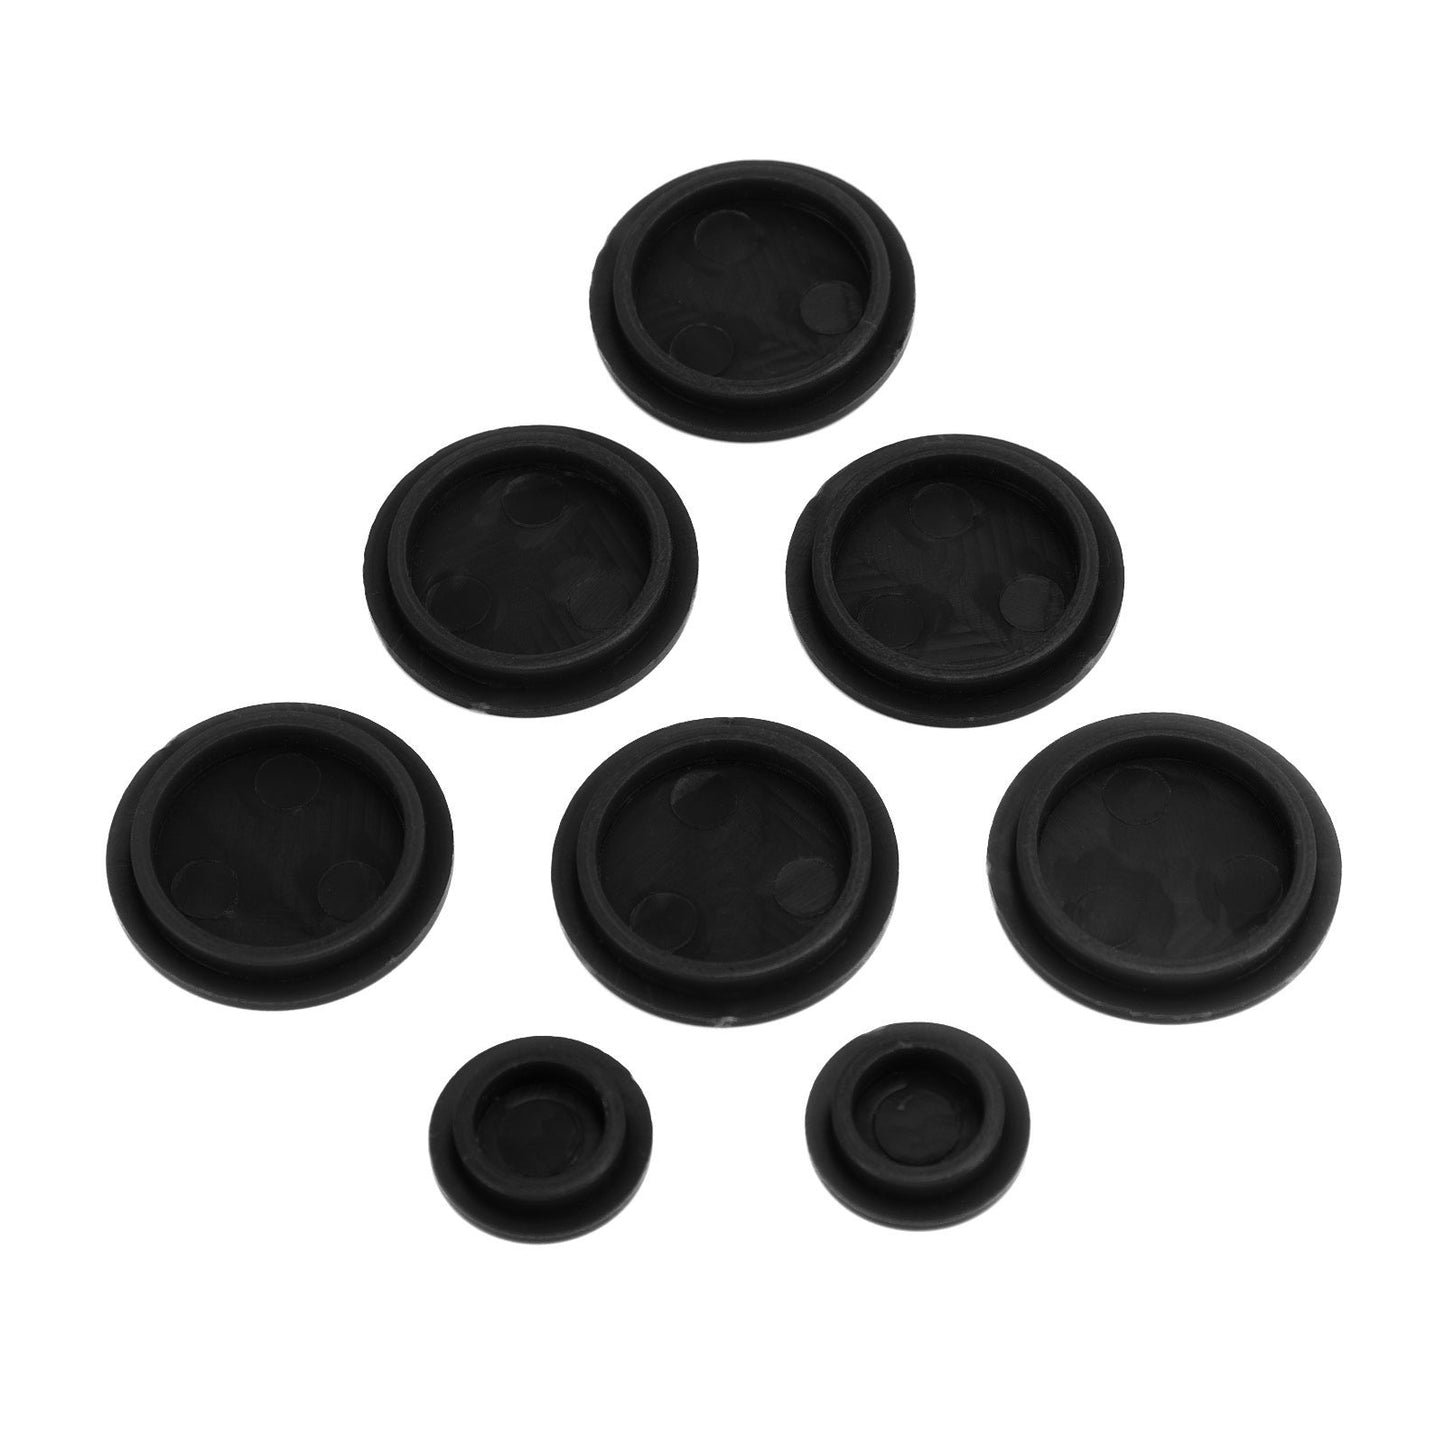 Grease Caps for John Deere 1023E 1025R 2025R Compact Tractor 120 Loader Black,Black Grease Caps For John Deere 1023E 1025R 2025R Compact Tractor 120 Loader,Compact Tractor 120 Loader Fitting Grease Caps For John Deere 1023E 1025R Black